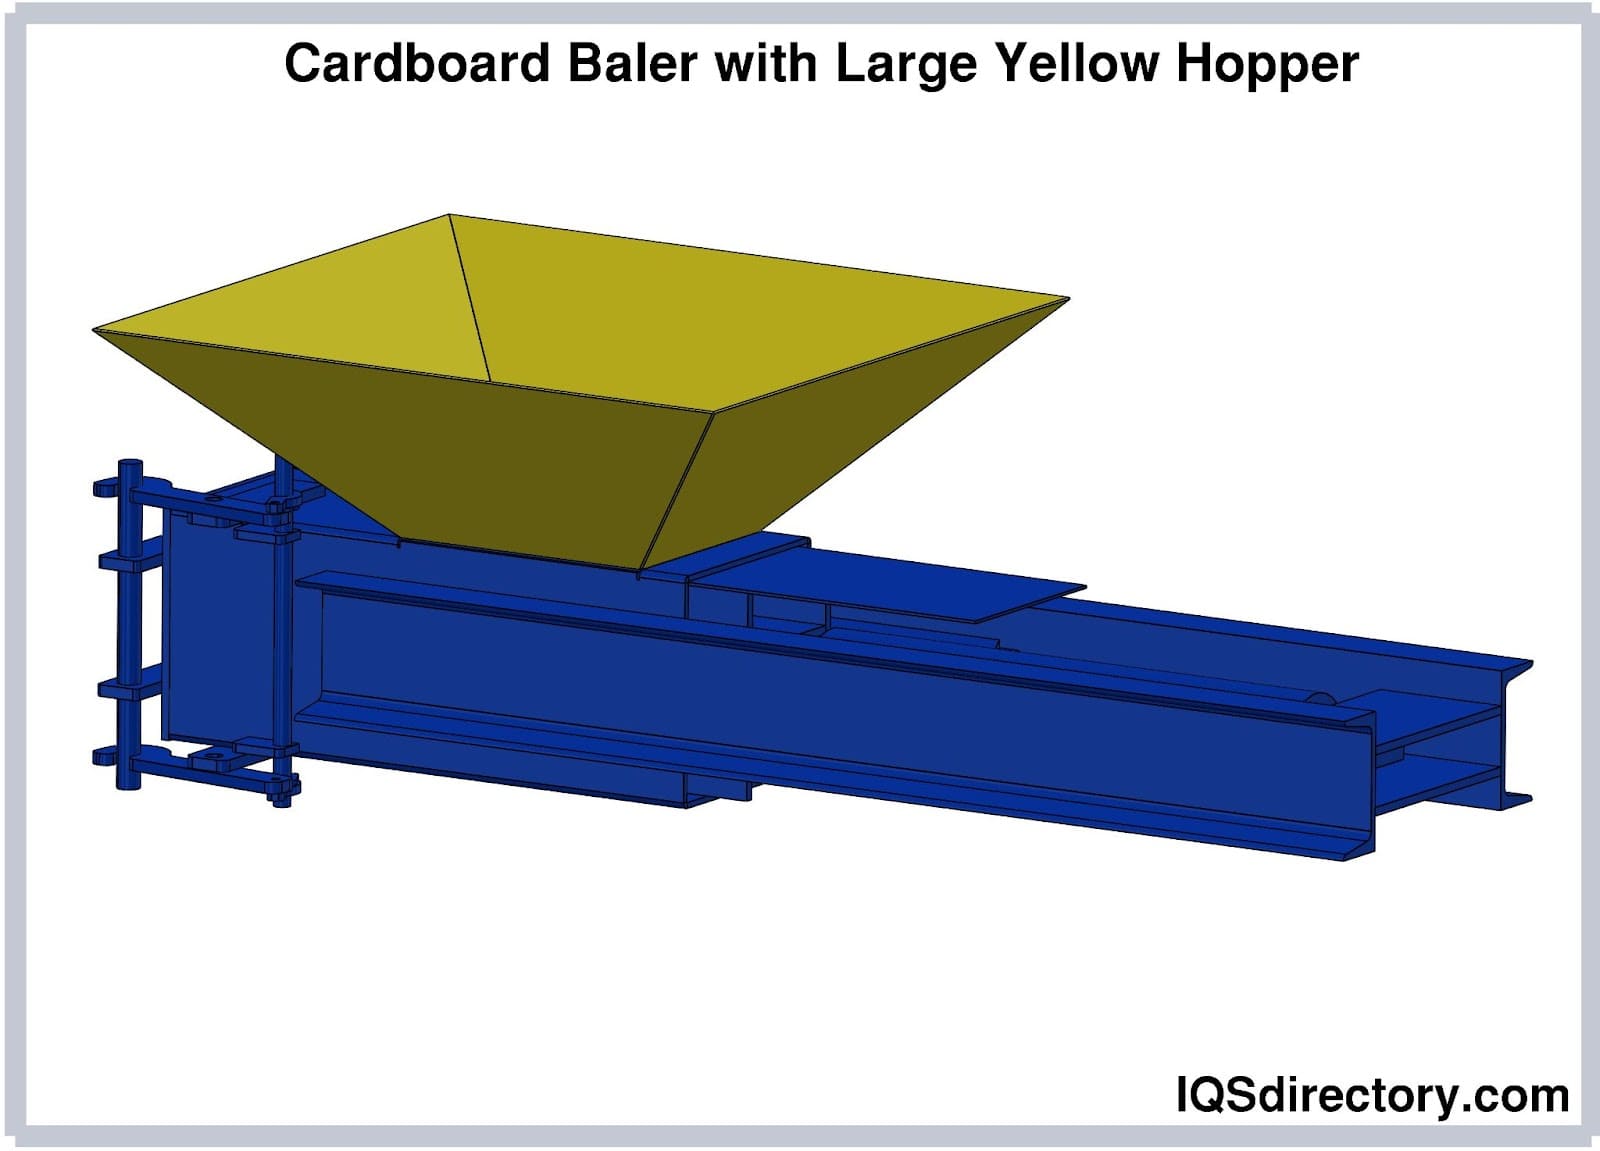 Cardboard Baler with Large Yellow Hopper